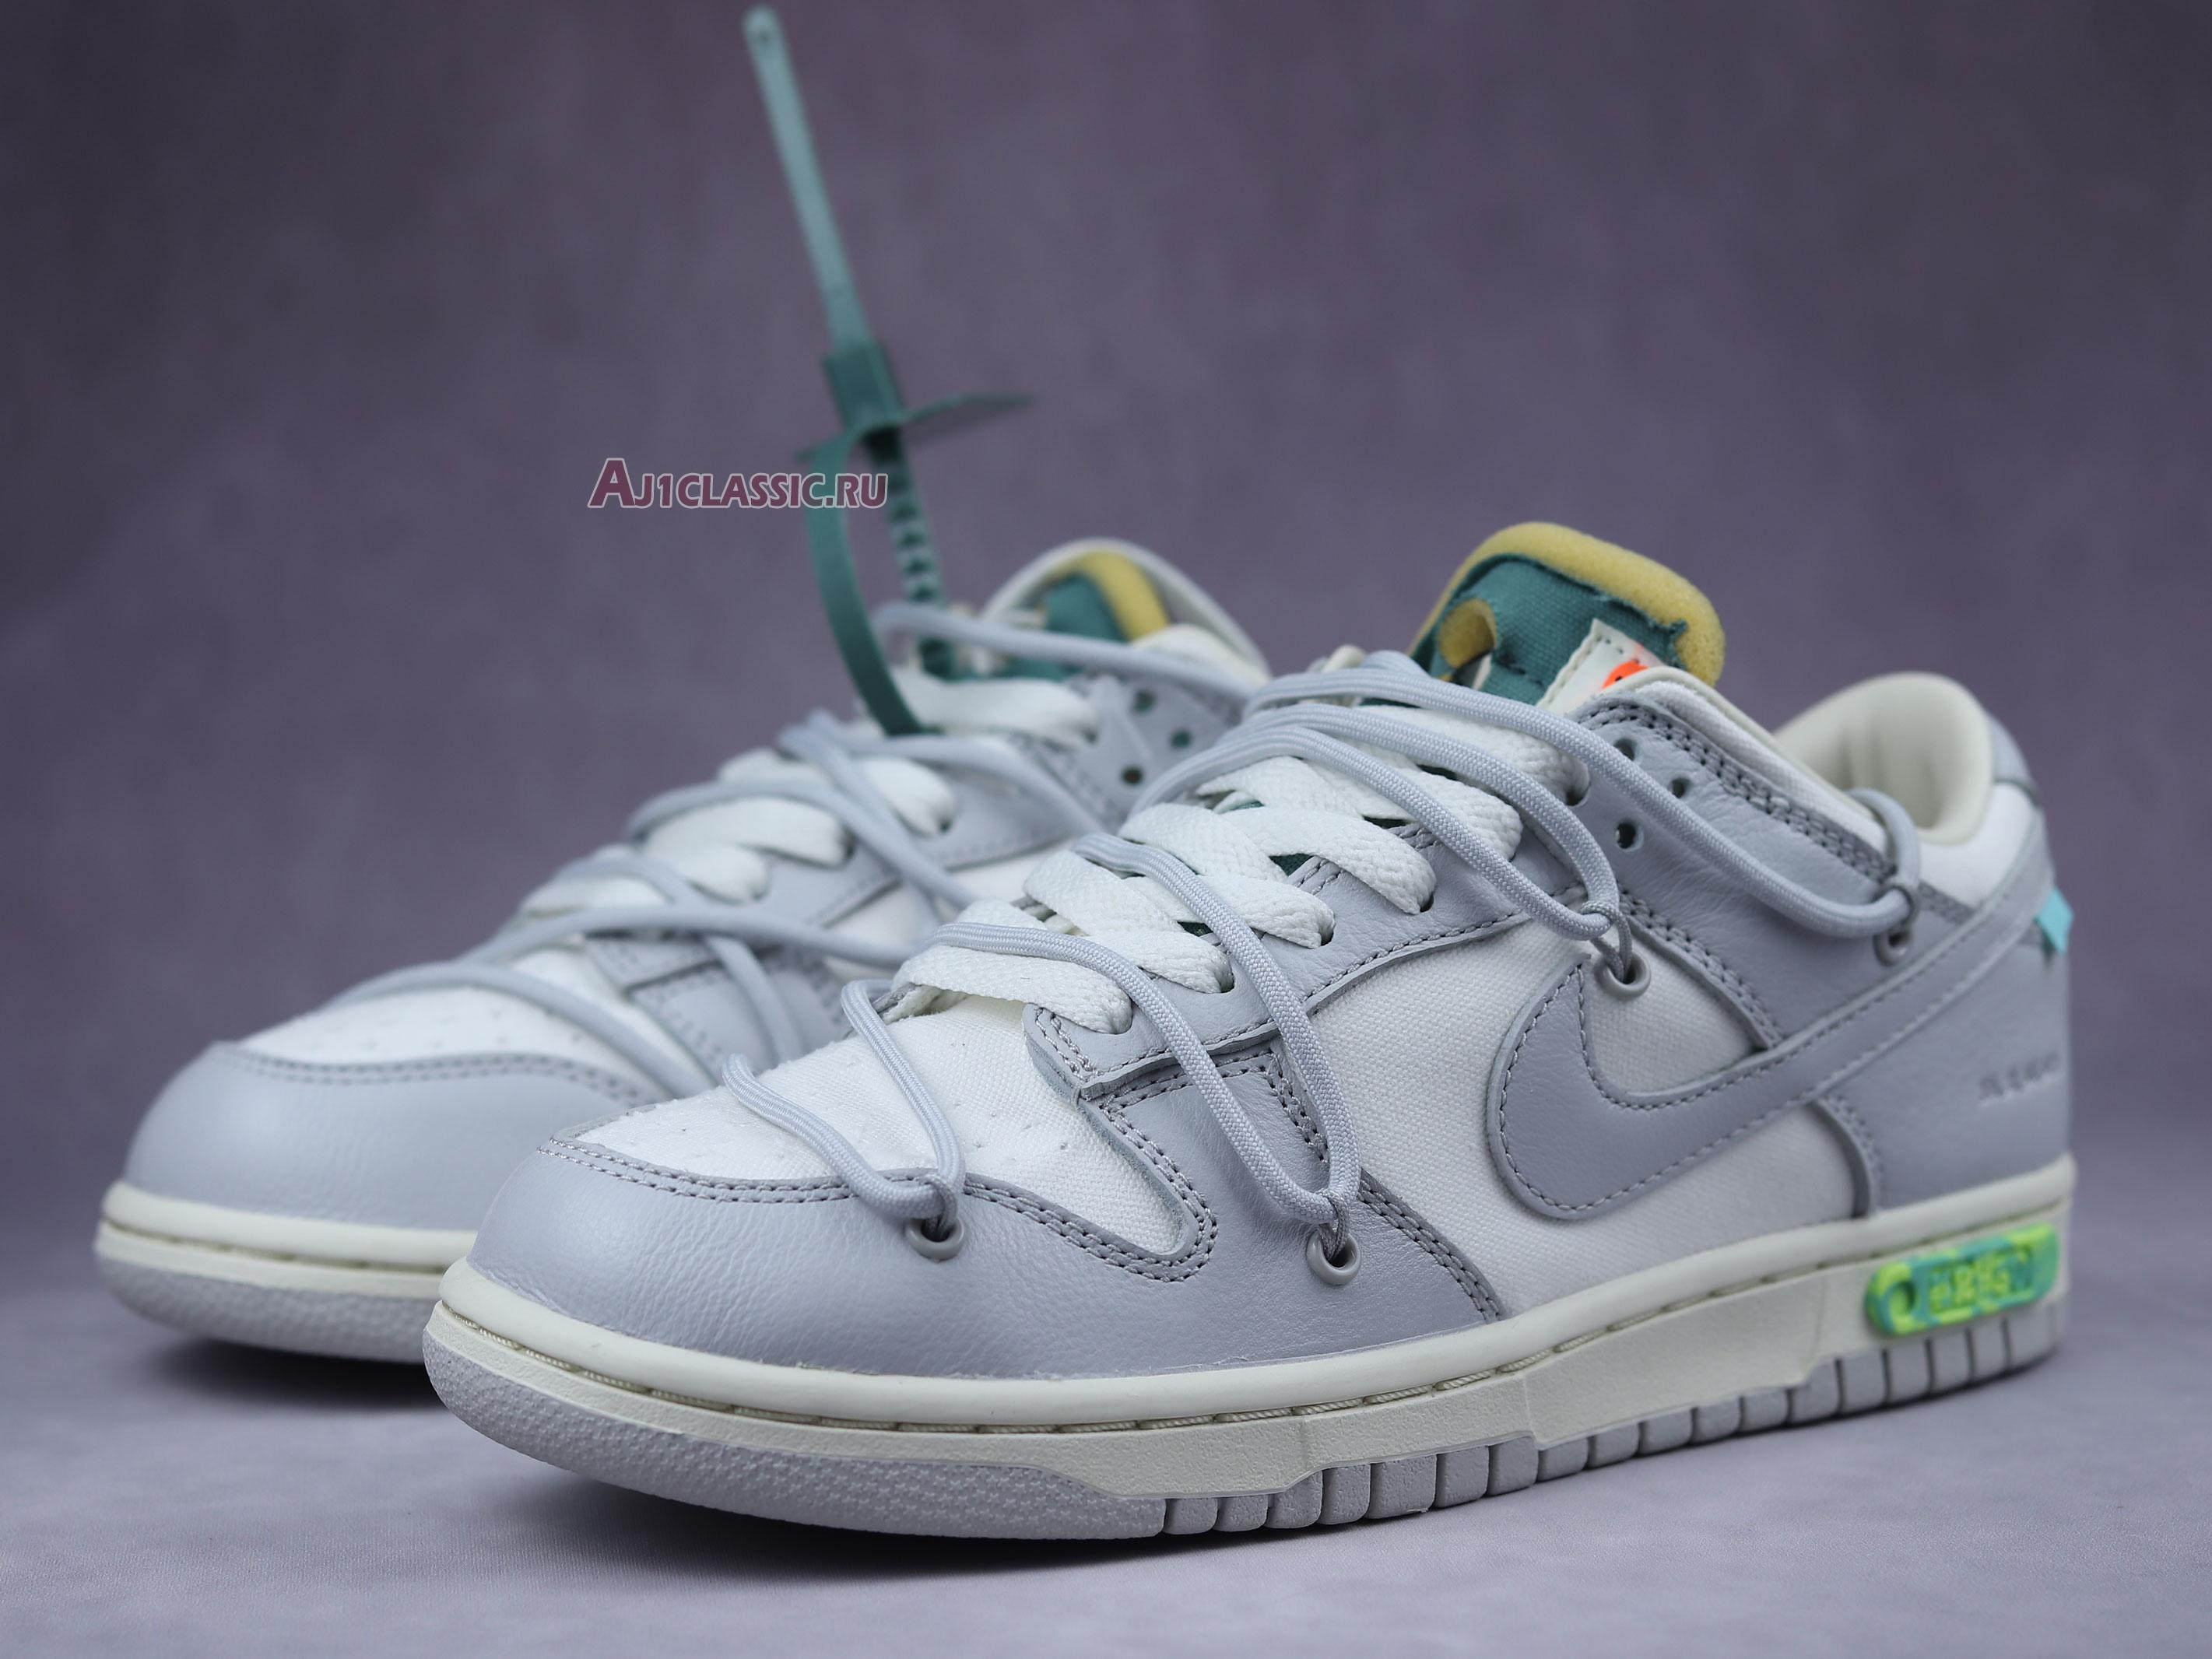 Off-White x Nike Dunk Low "Lot 42 of 50" DM1602-117